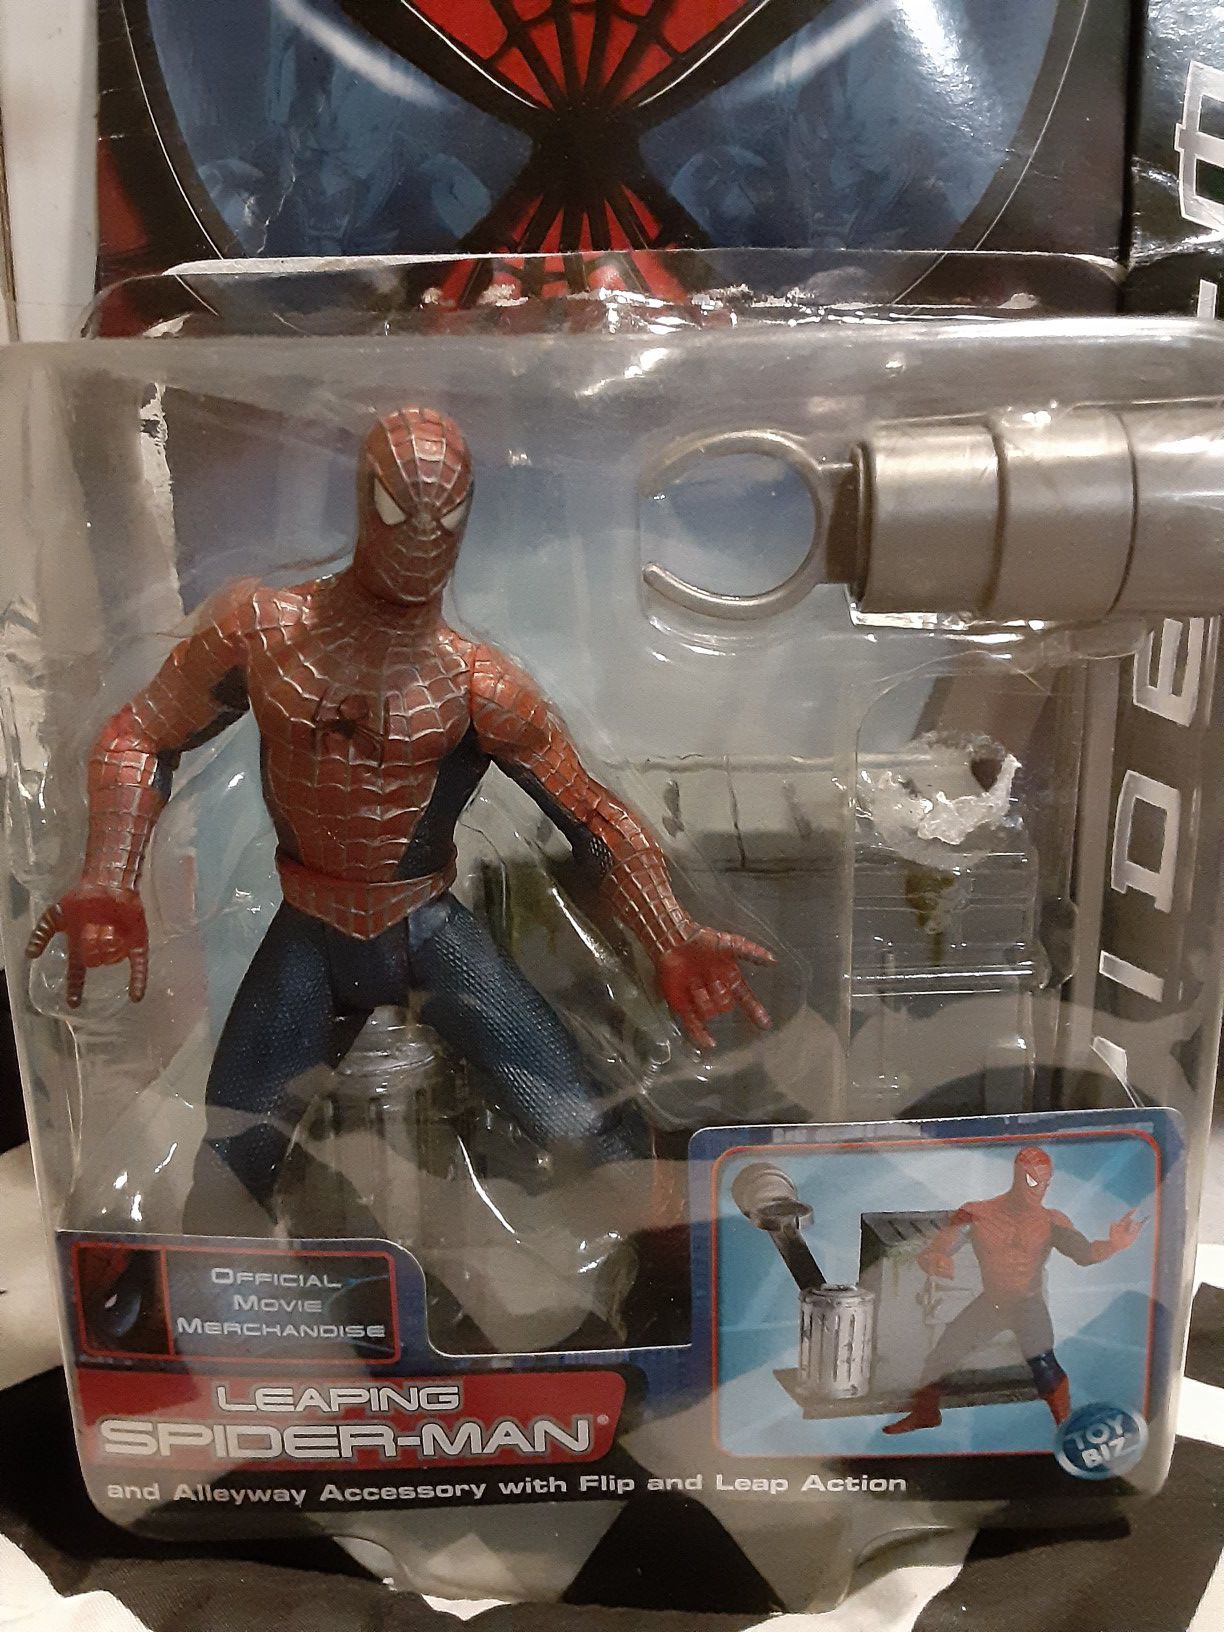 Highly Collectable Leaping SPIDER-MAN Action Figure From MARVEL